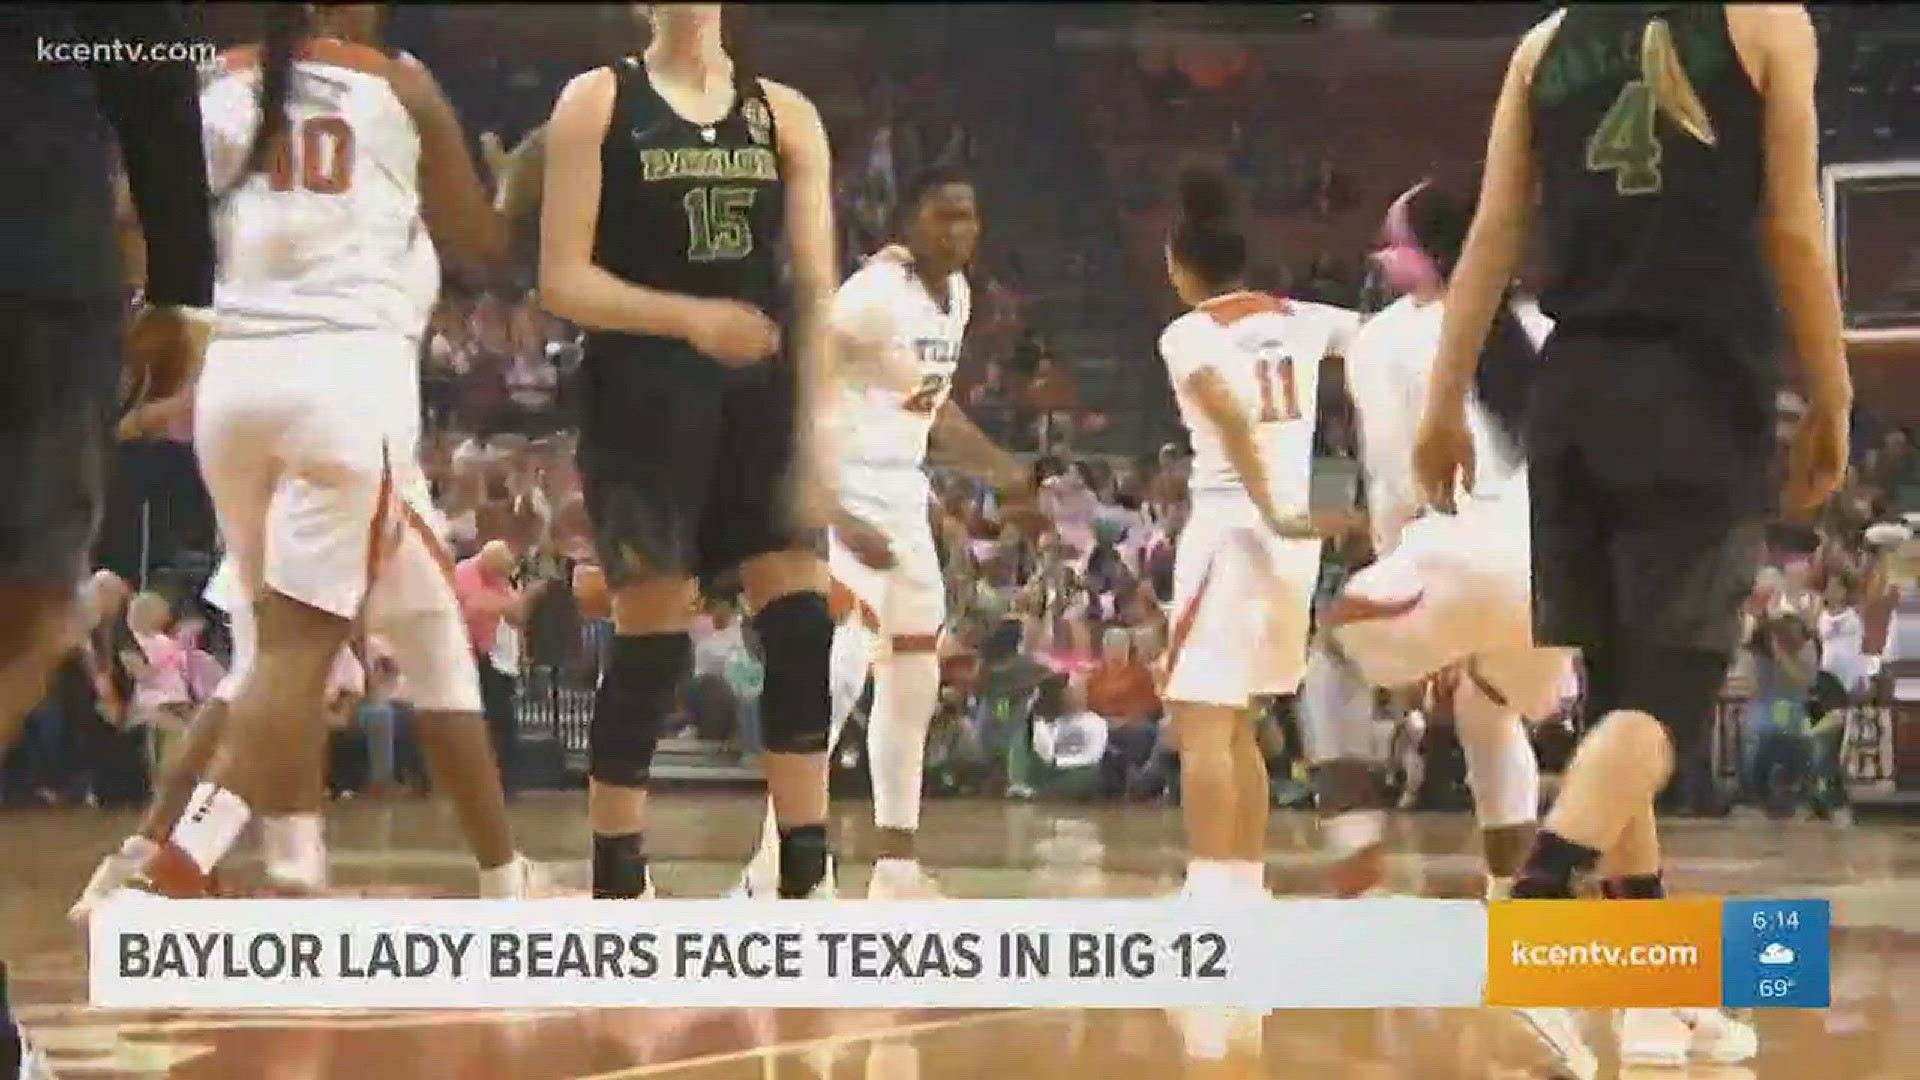 Jessica Morrey reports on Texas Today.